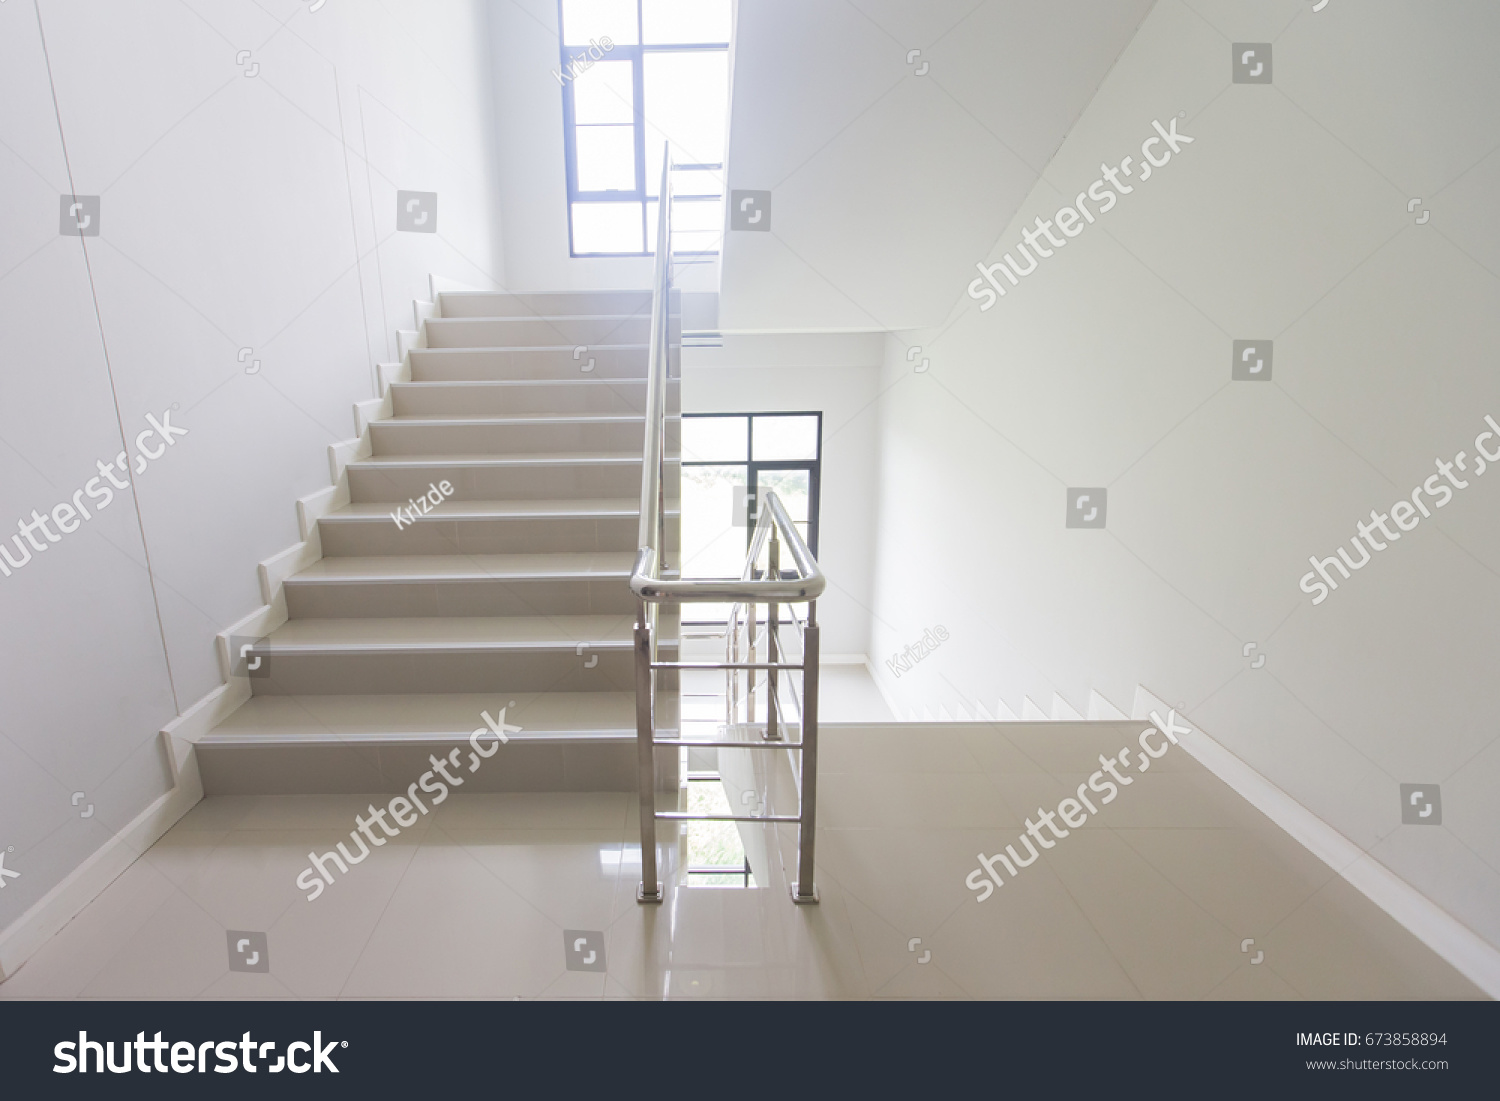 staircase - emergency exit in hotel, close-up staircase, interior staircases, interior staircases hotel, Staircase in modern house, staircase in modern building #673858894